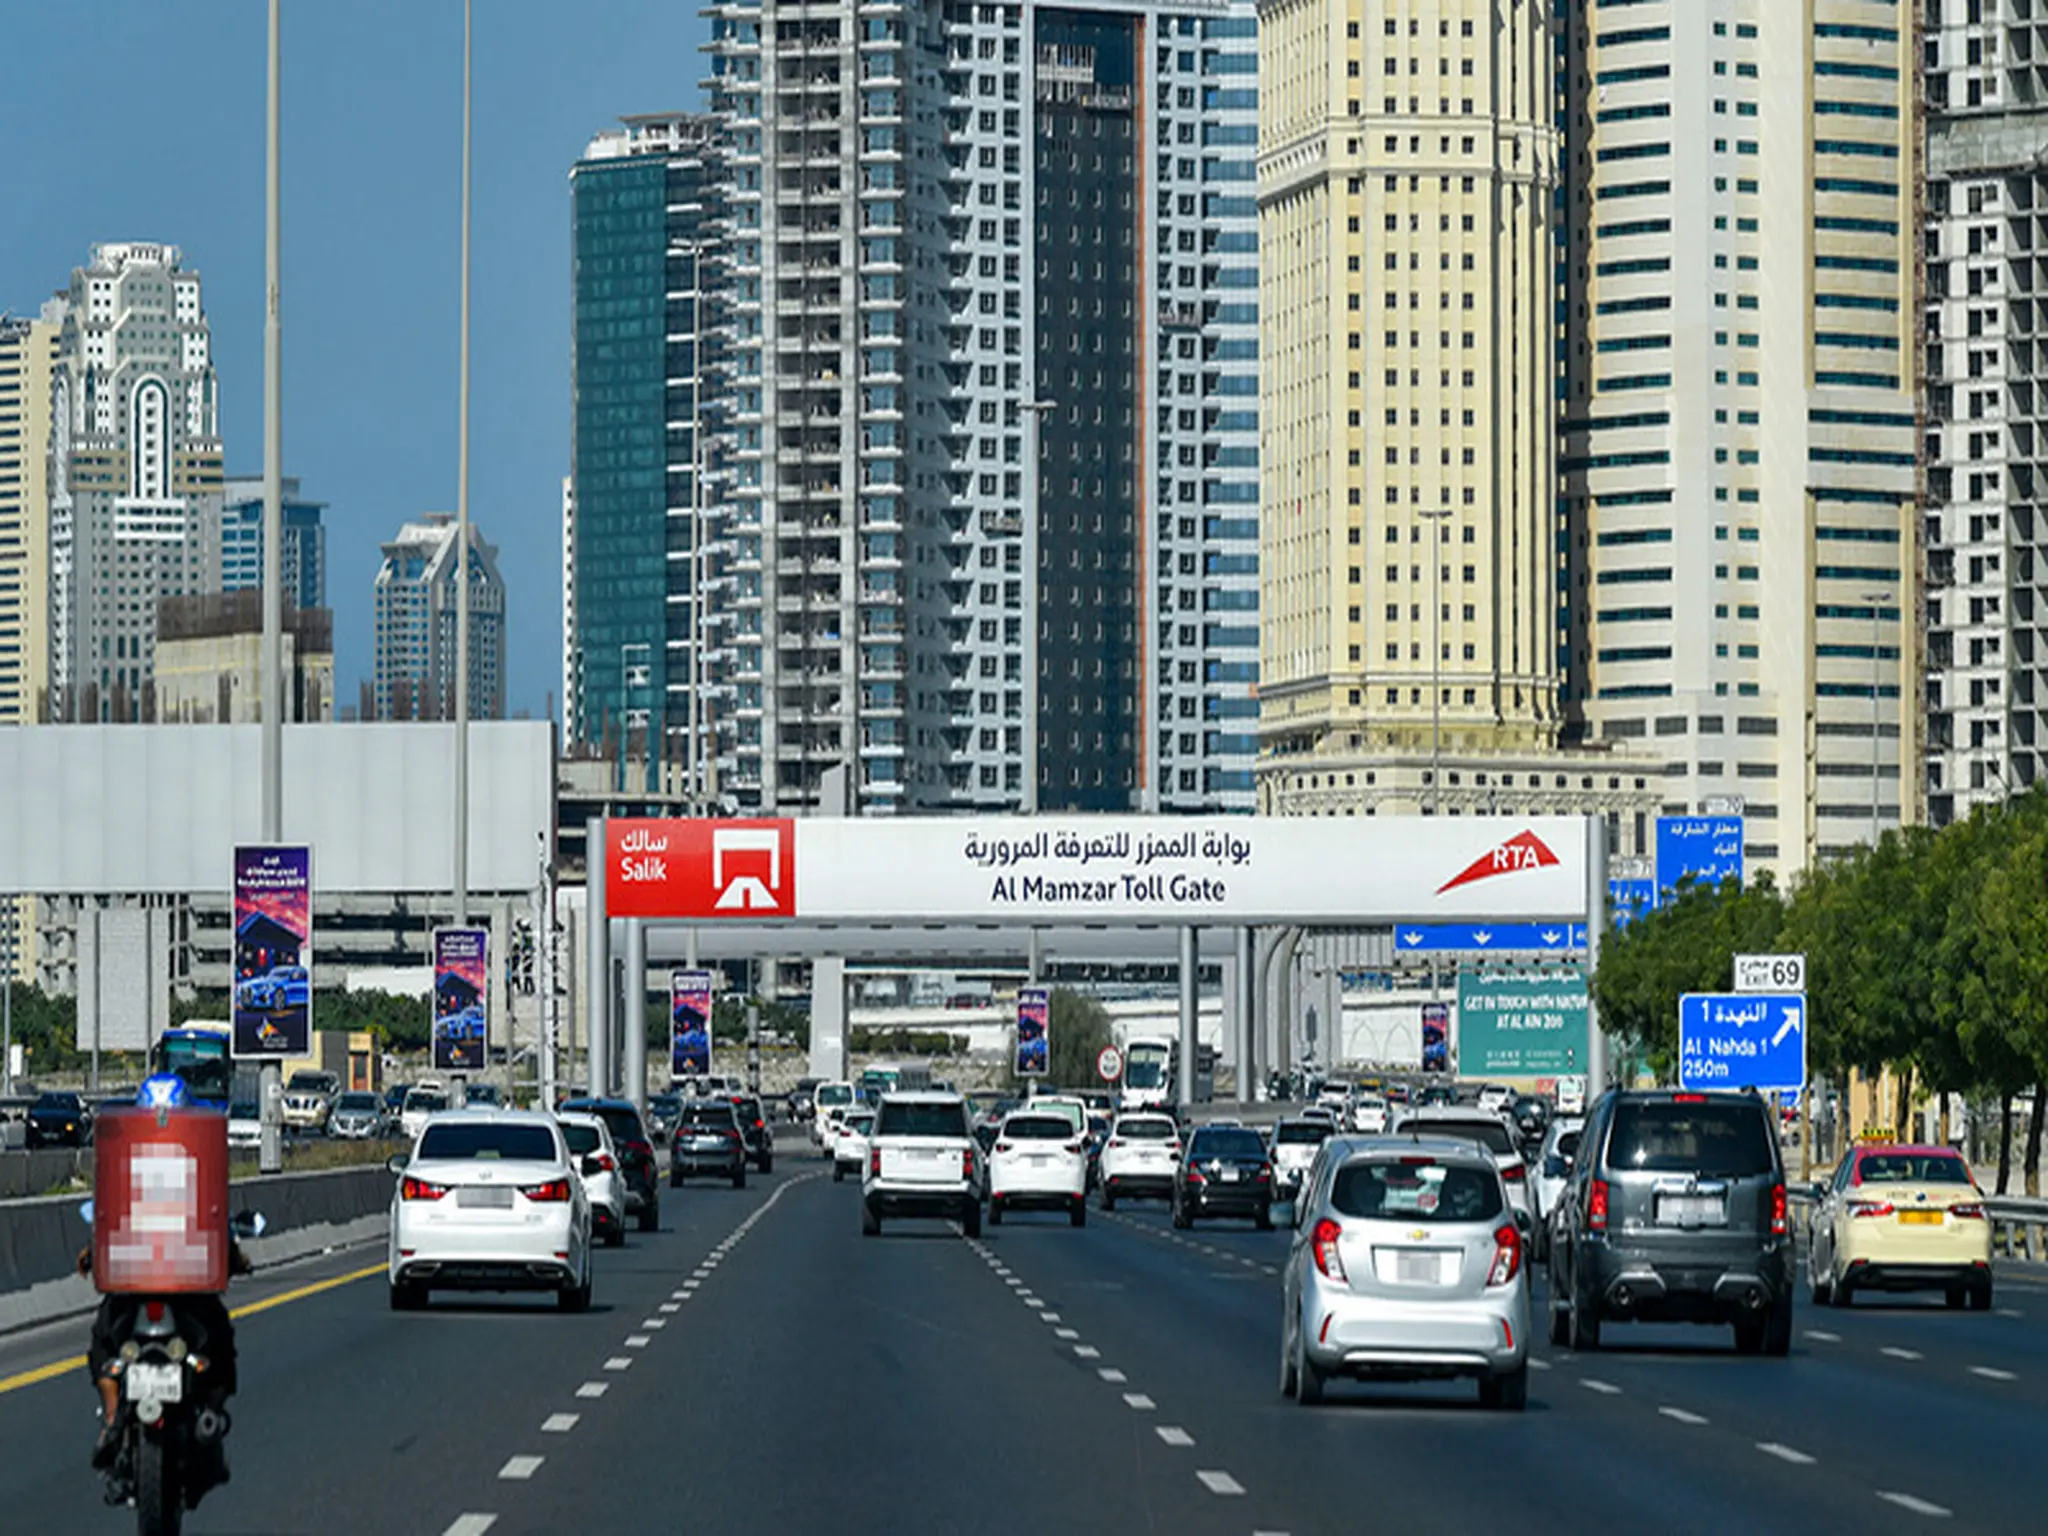 Dubai Al Barsha .. the most popular residential buildings for renting apartments for families and individuals